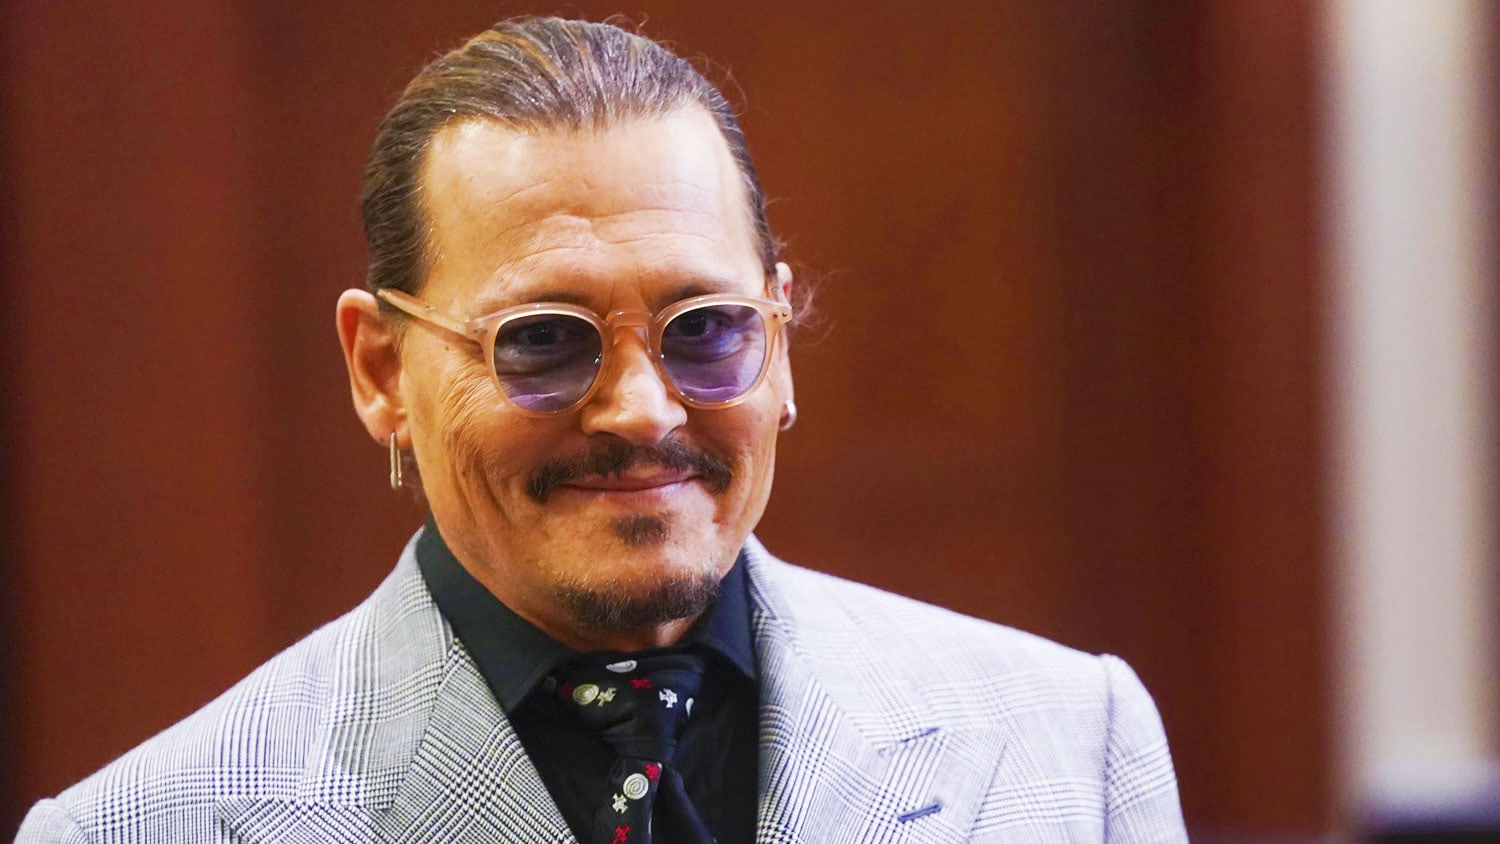 Johnny Depp Out, Kate Moss & Walter Hamada To Testify During Amber Heard Trial